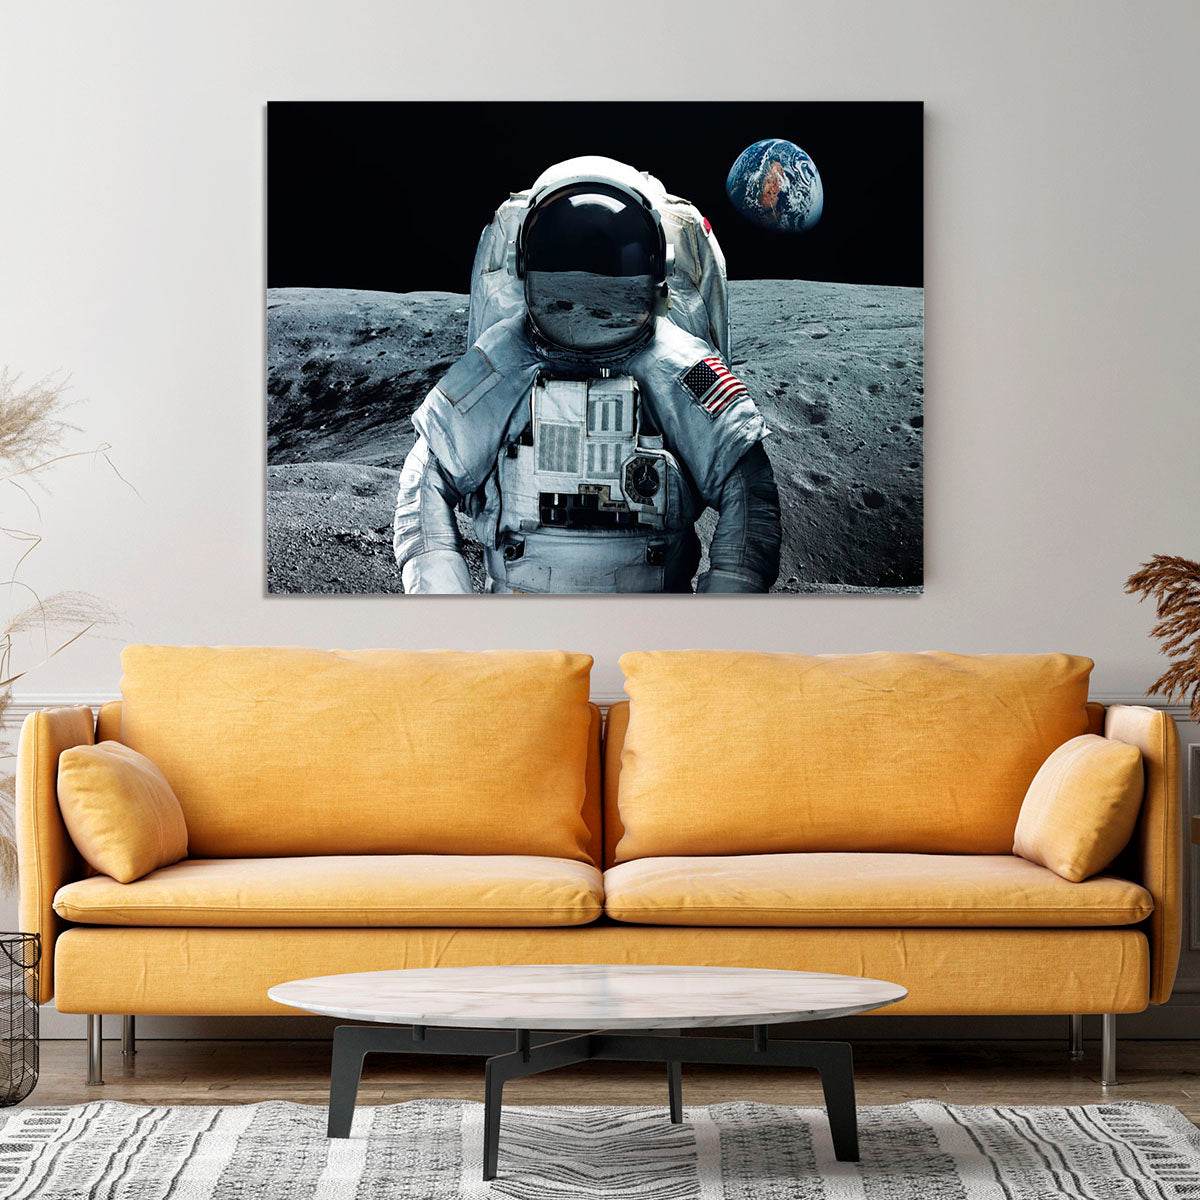 Astronaut at the moon Canvas Print or Poster - Canvas Art Rocks - 4